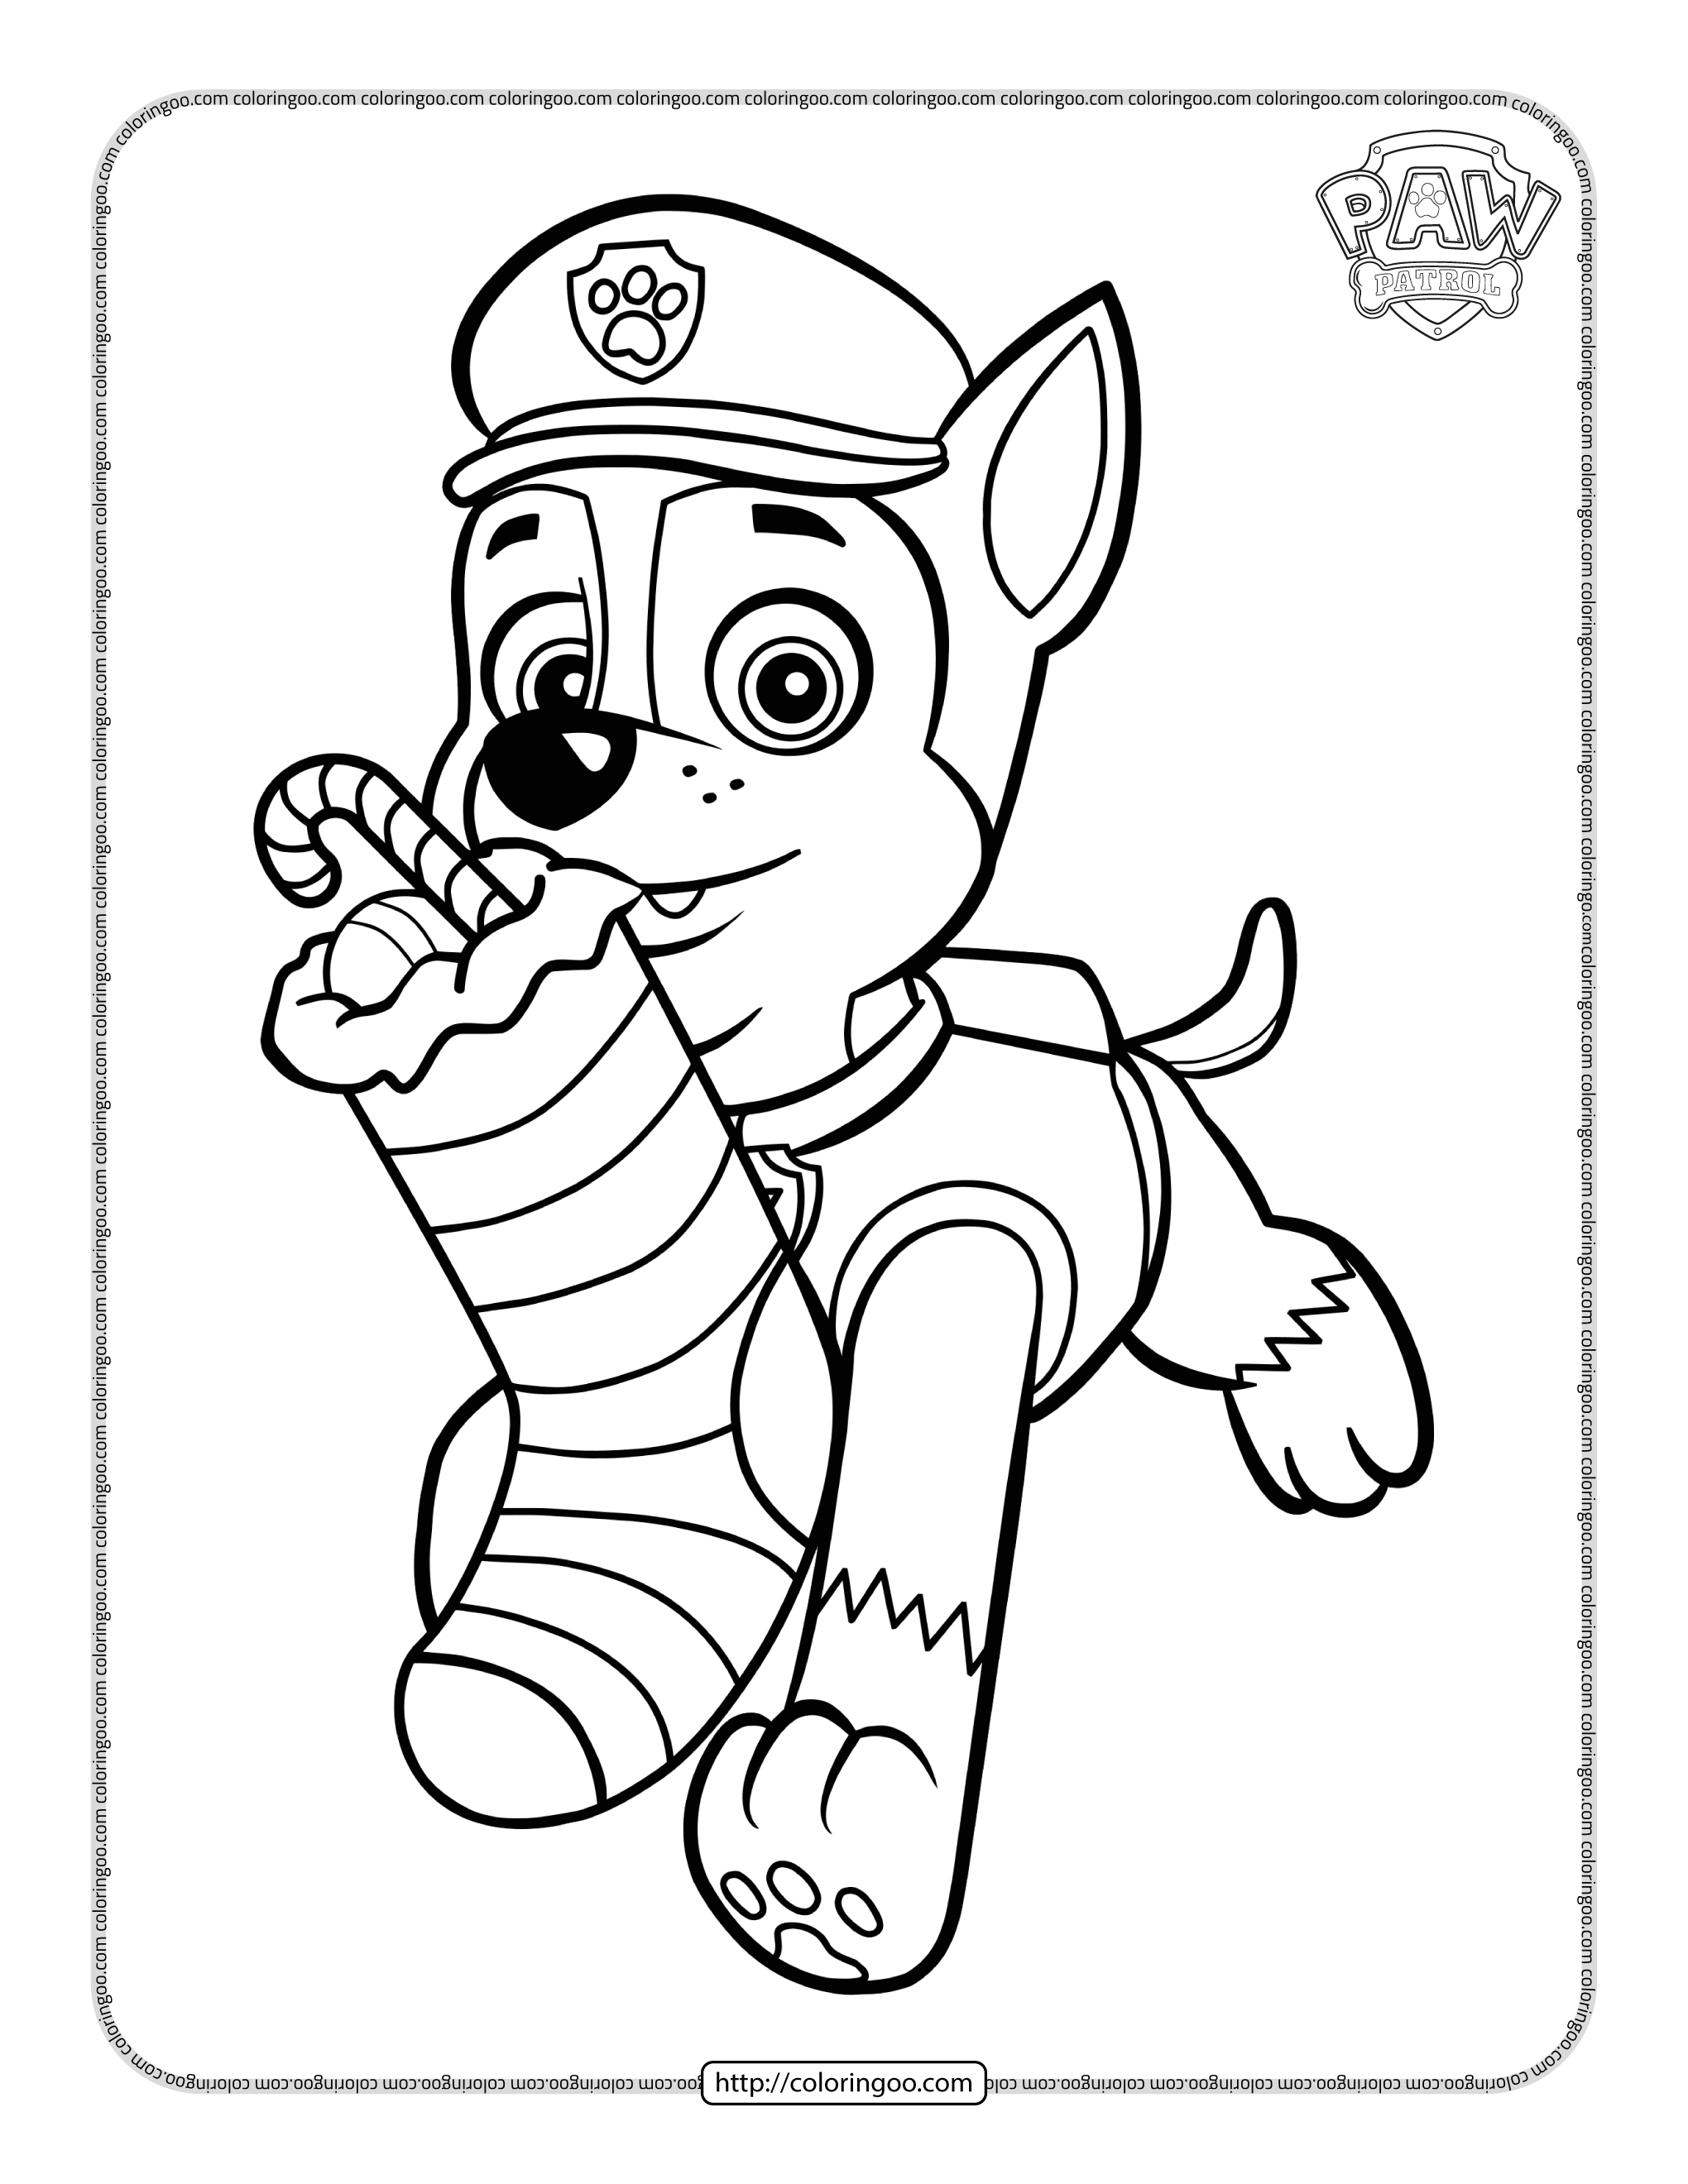 chase with christmas stocking coloring page